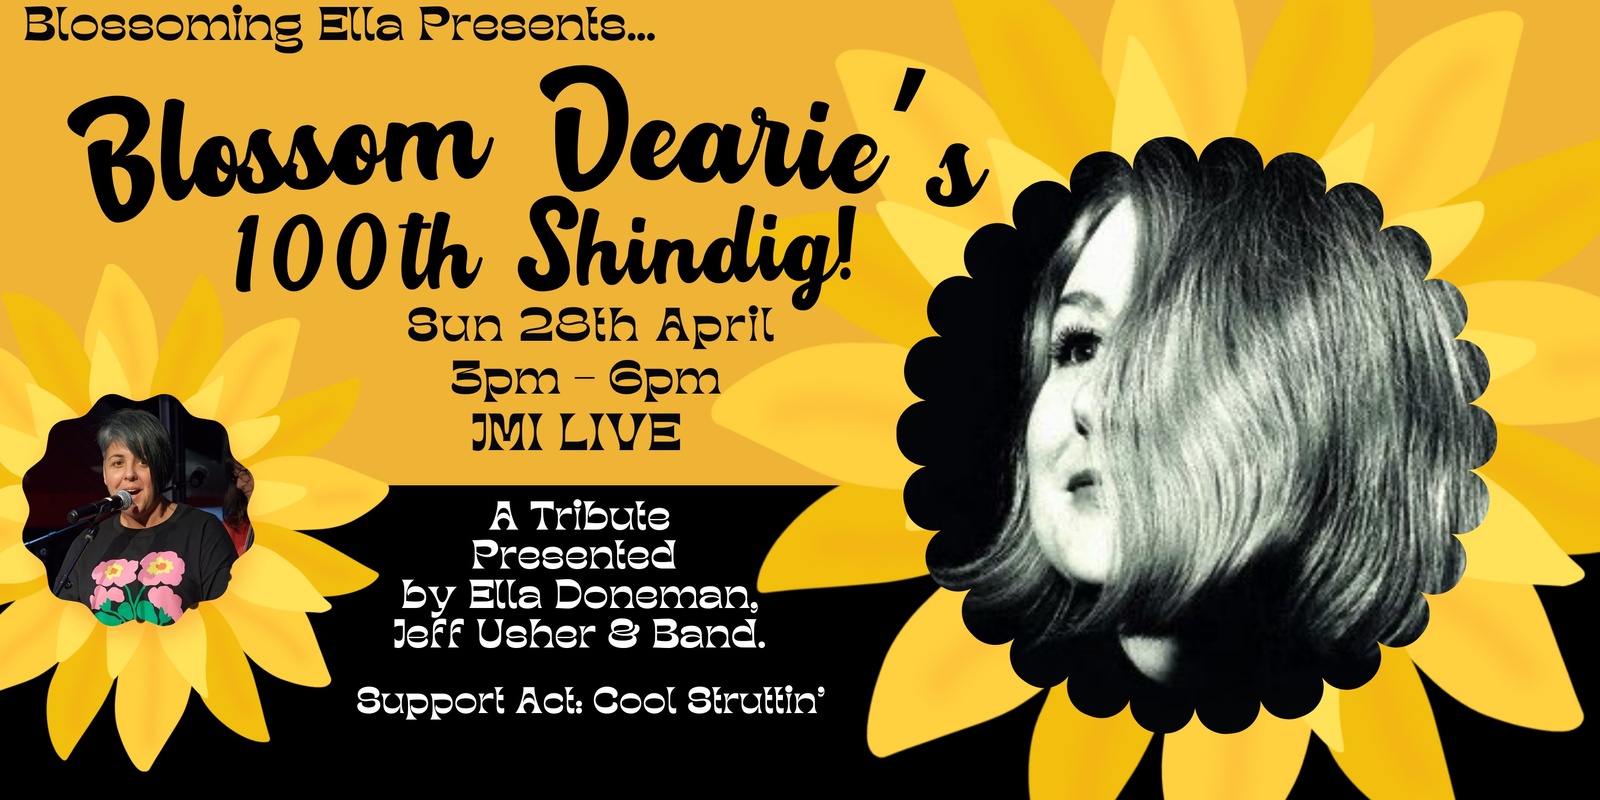 Banner image for Blossoming Ella Presents: Blossom Dearie's 100th Shindig 